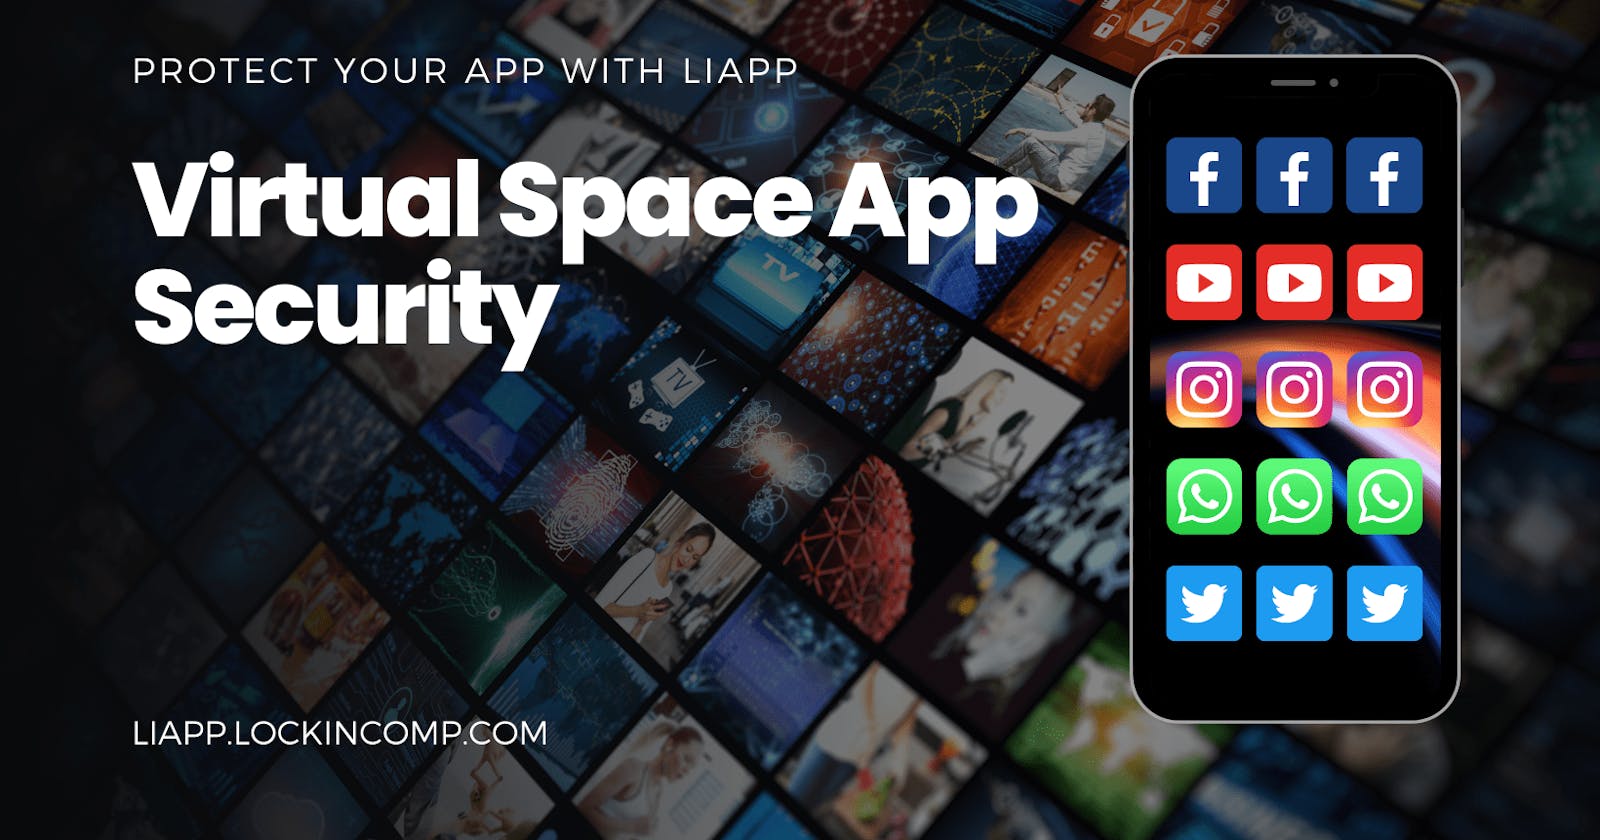 A Response Measure to the Security Threat of Virtual Space App